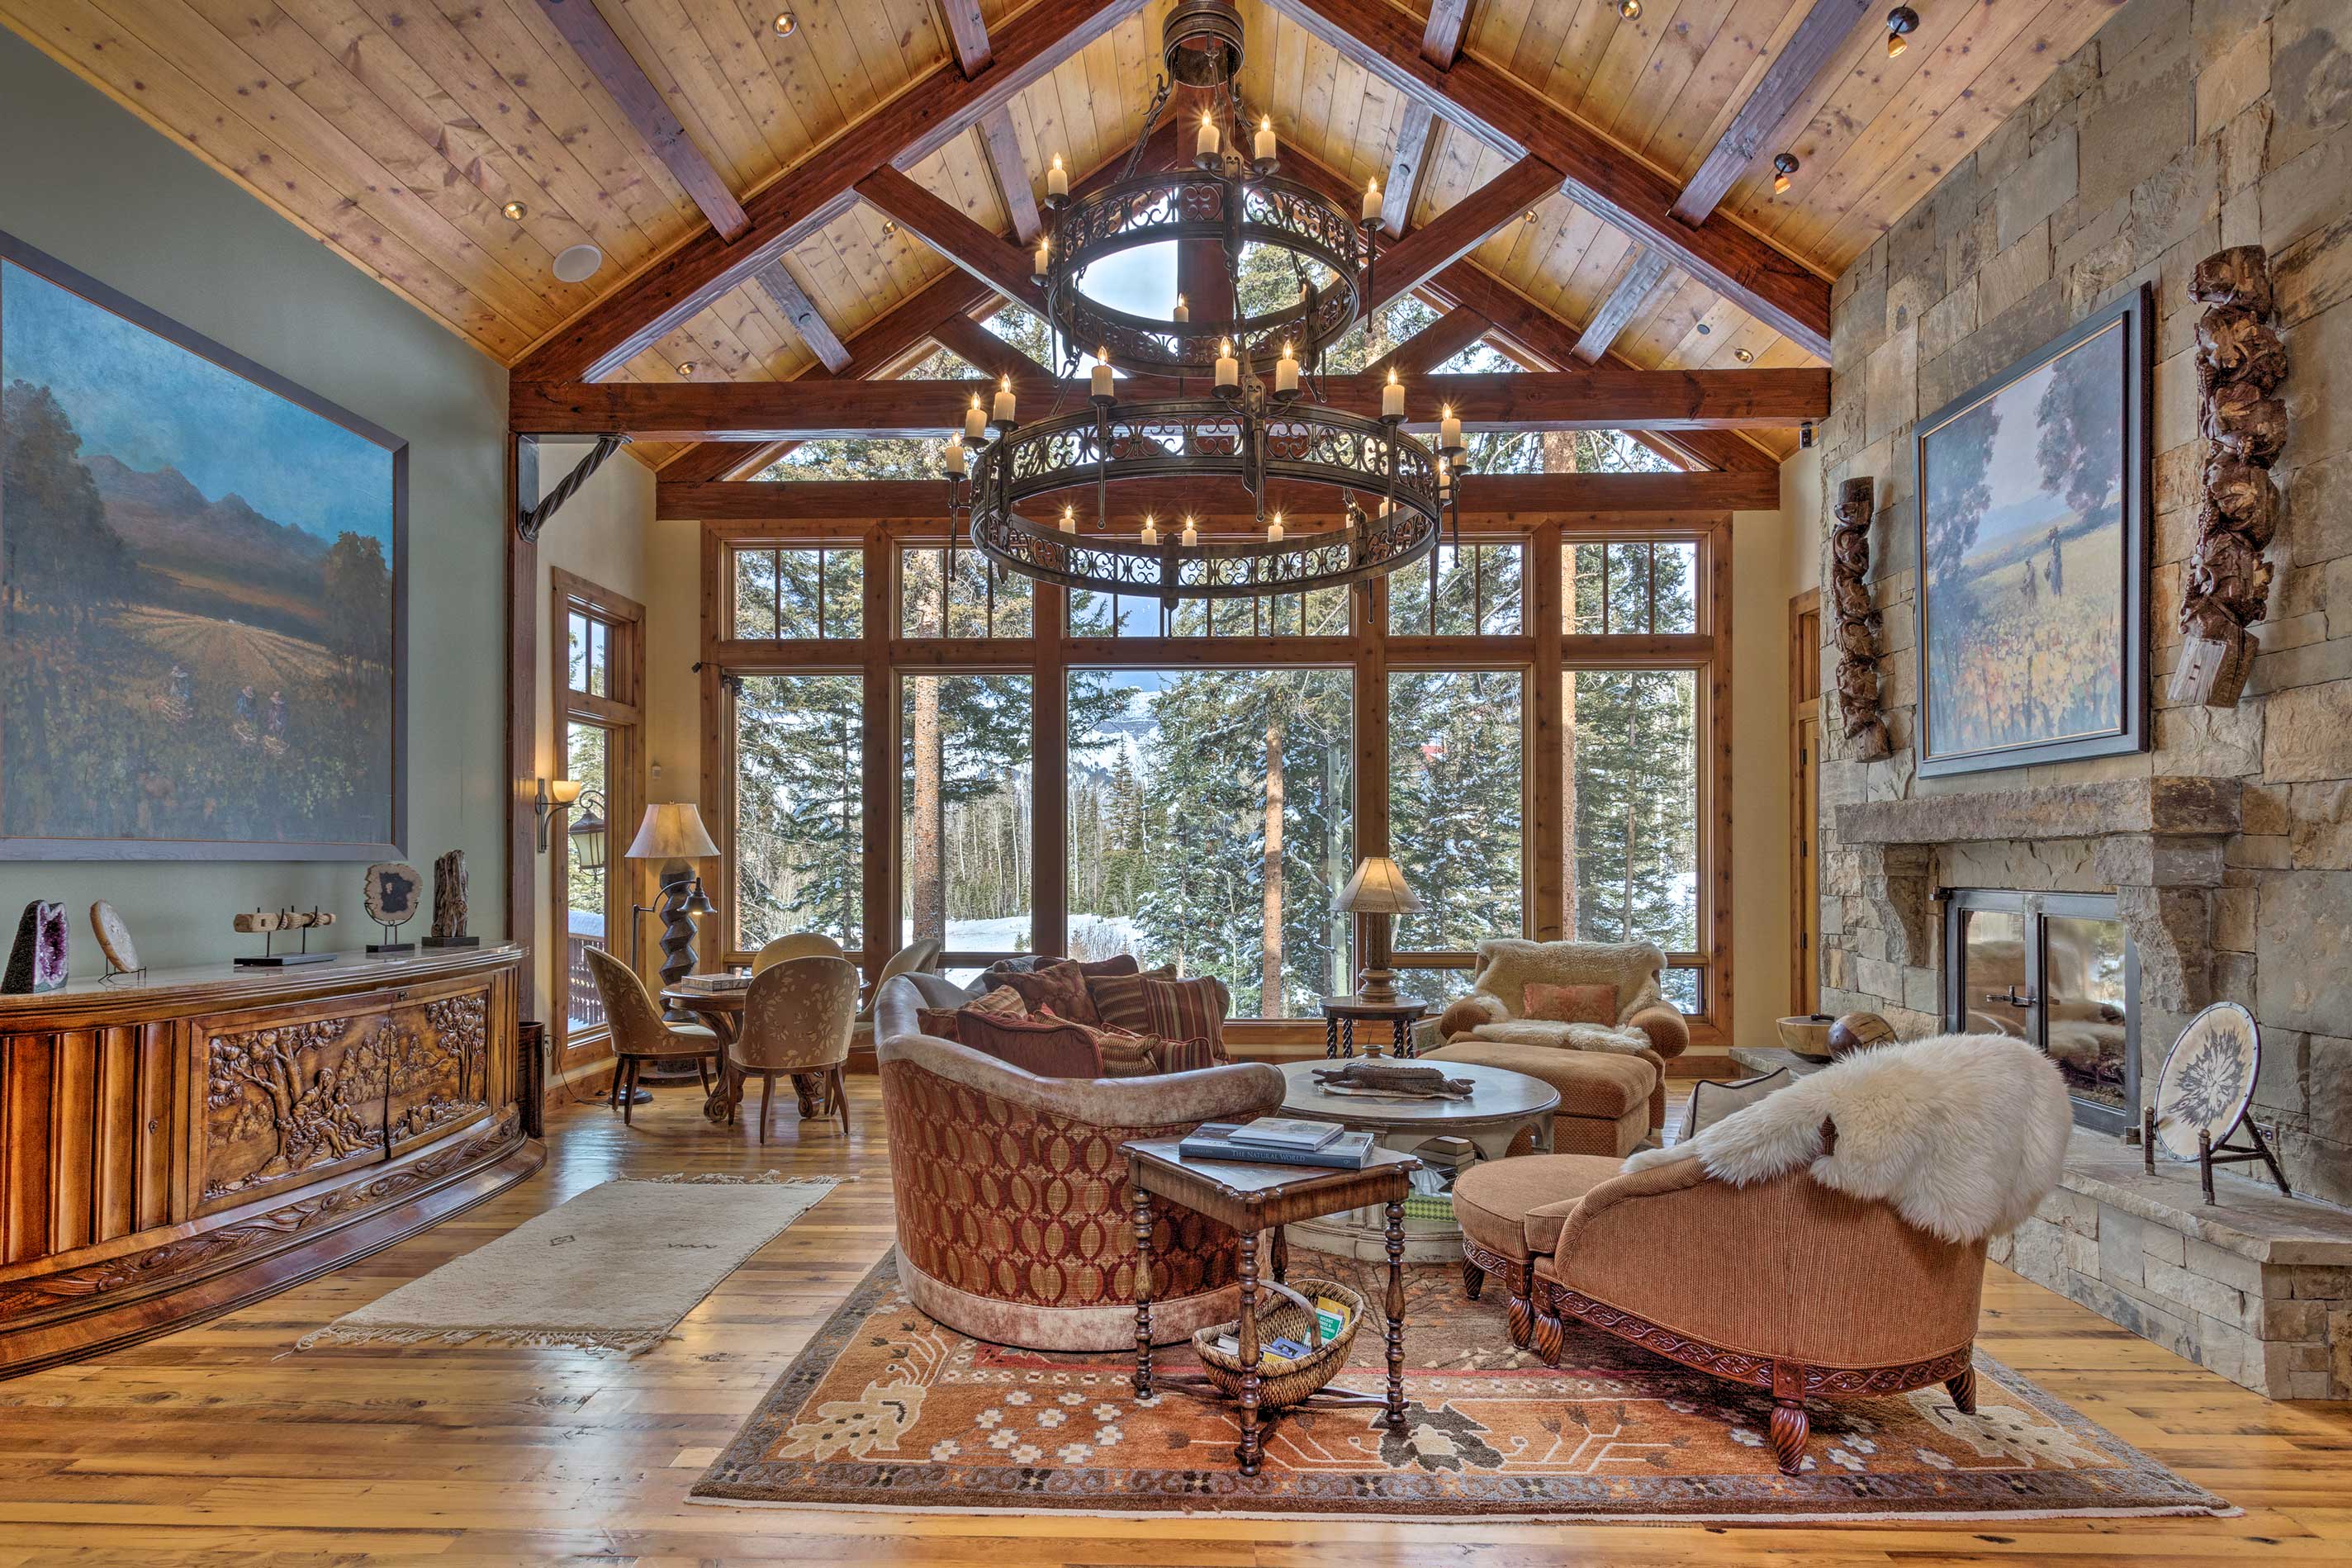 Welcome to your stunning Colorado home-away-from-home!